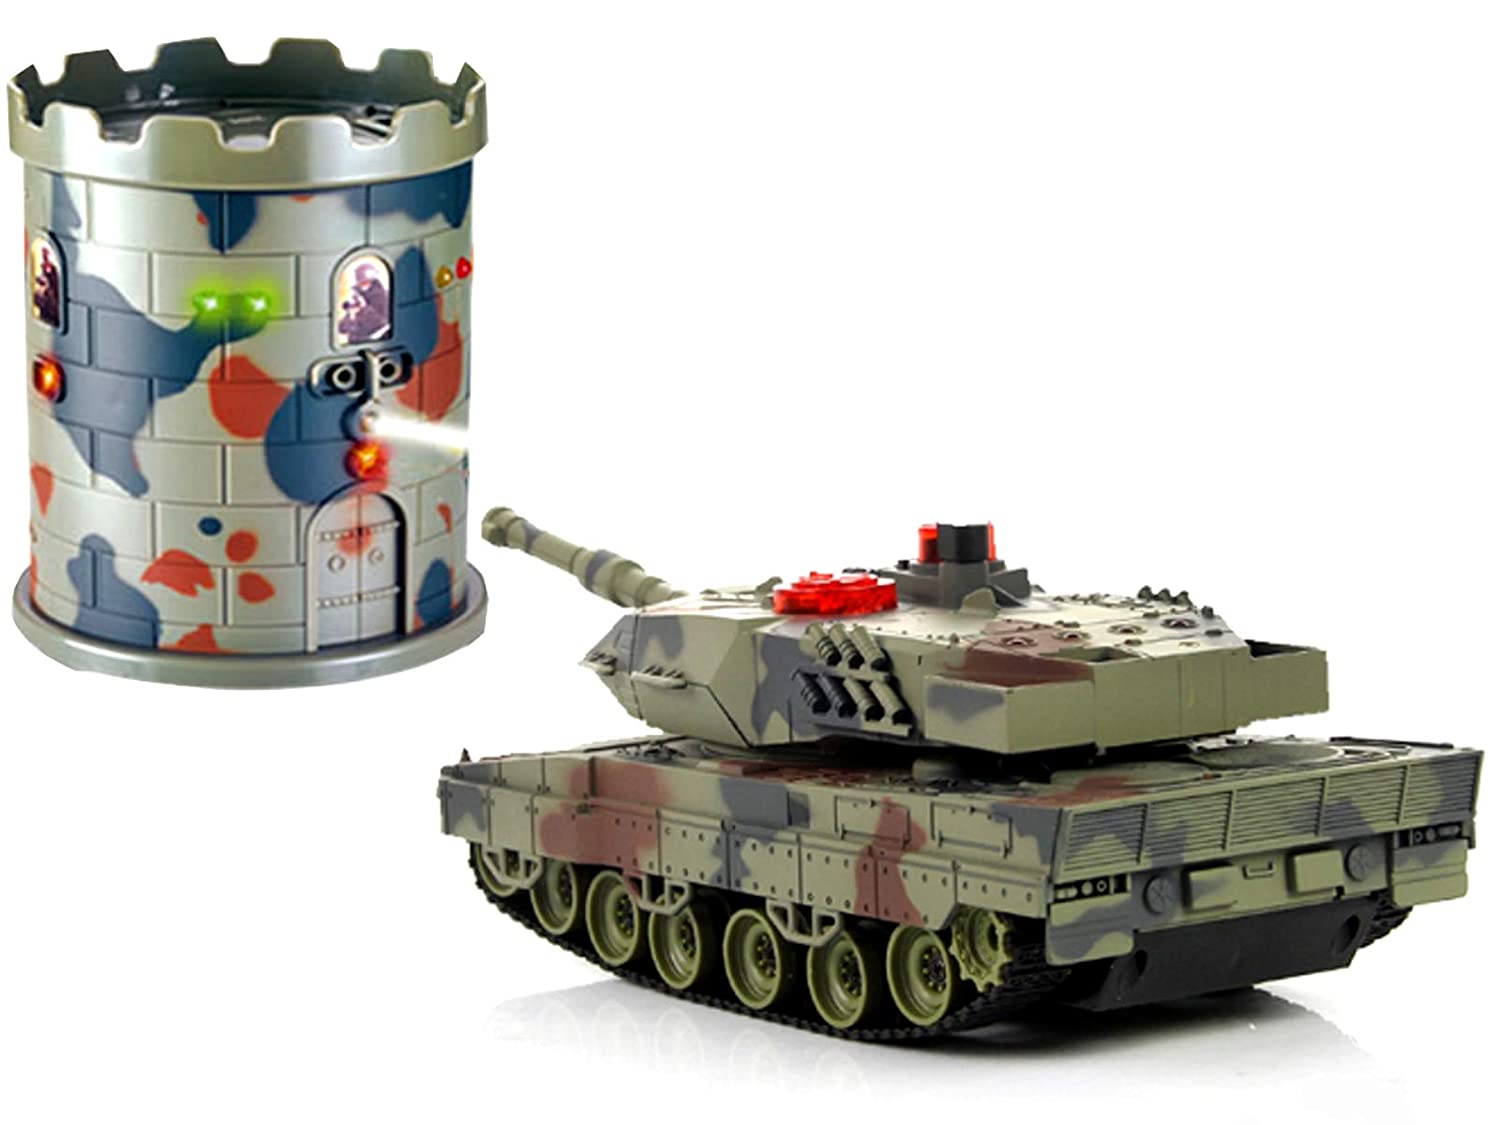 Top 9 Best Remote Control Tanks Battle Reviews in 2023 2